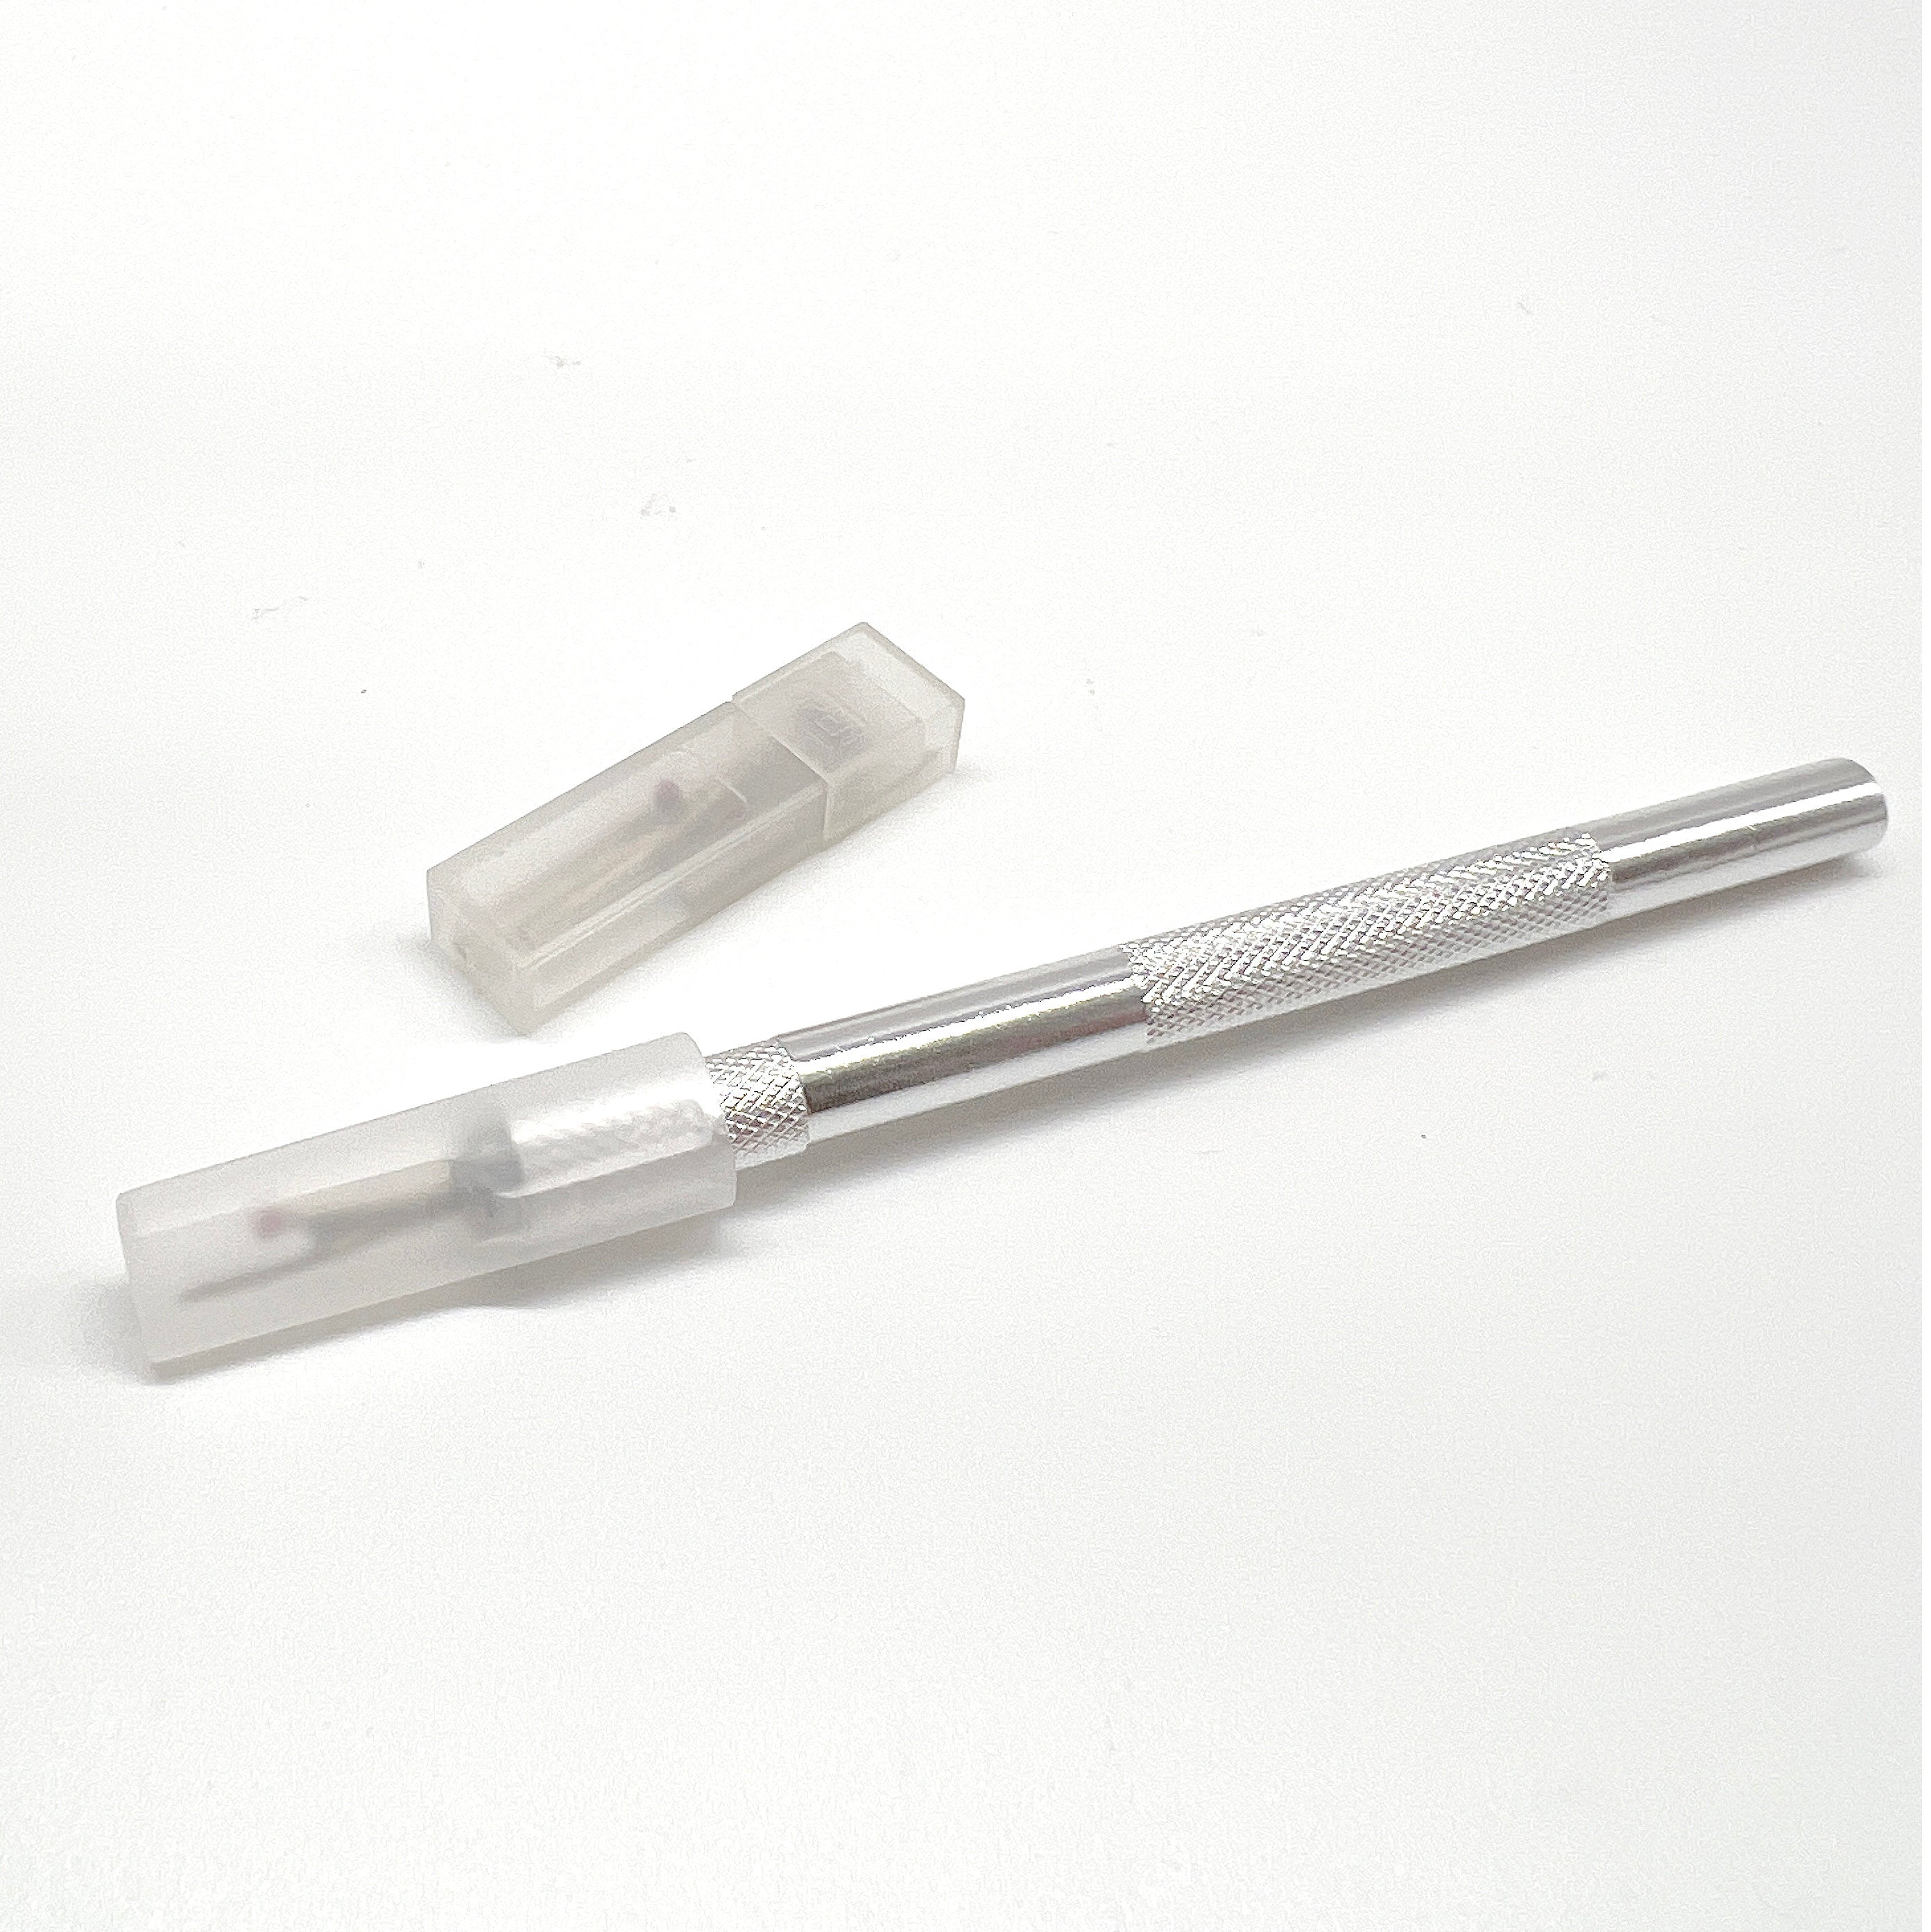 Precision Metal Seam Ripper Thread Cutters with Extra Tips in 2 Colors